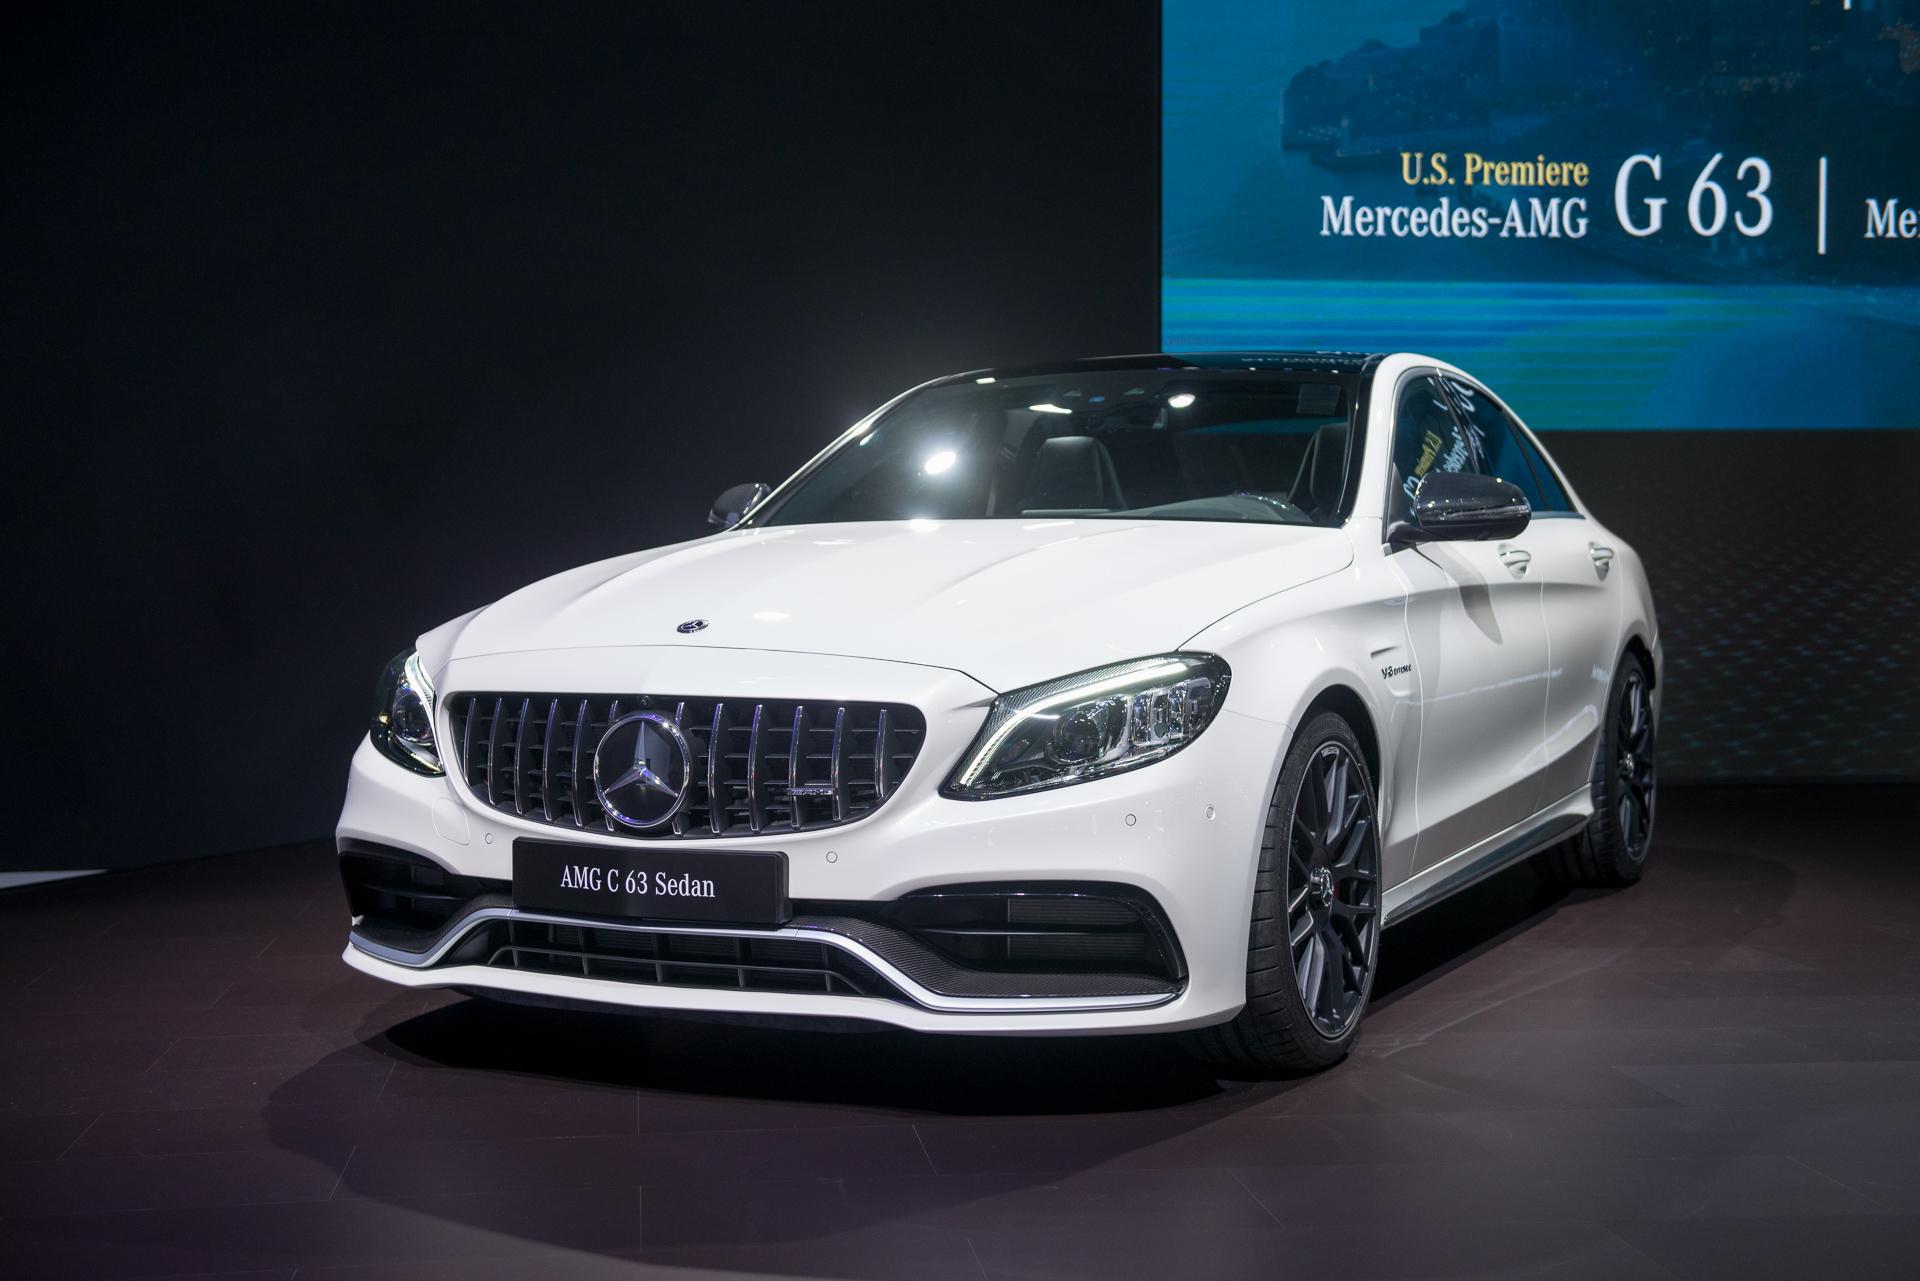 2019 Mercedes Amg C63 Gets Numerous Updates But No Extra Power